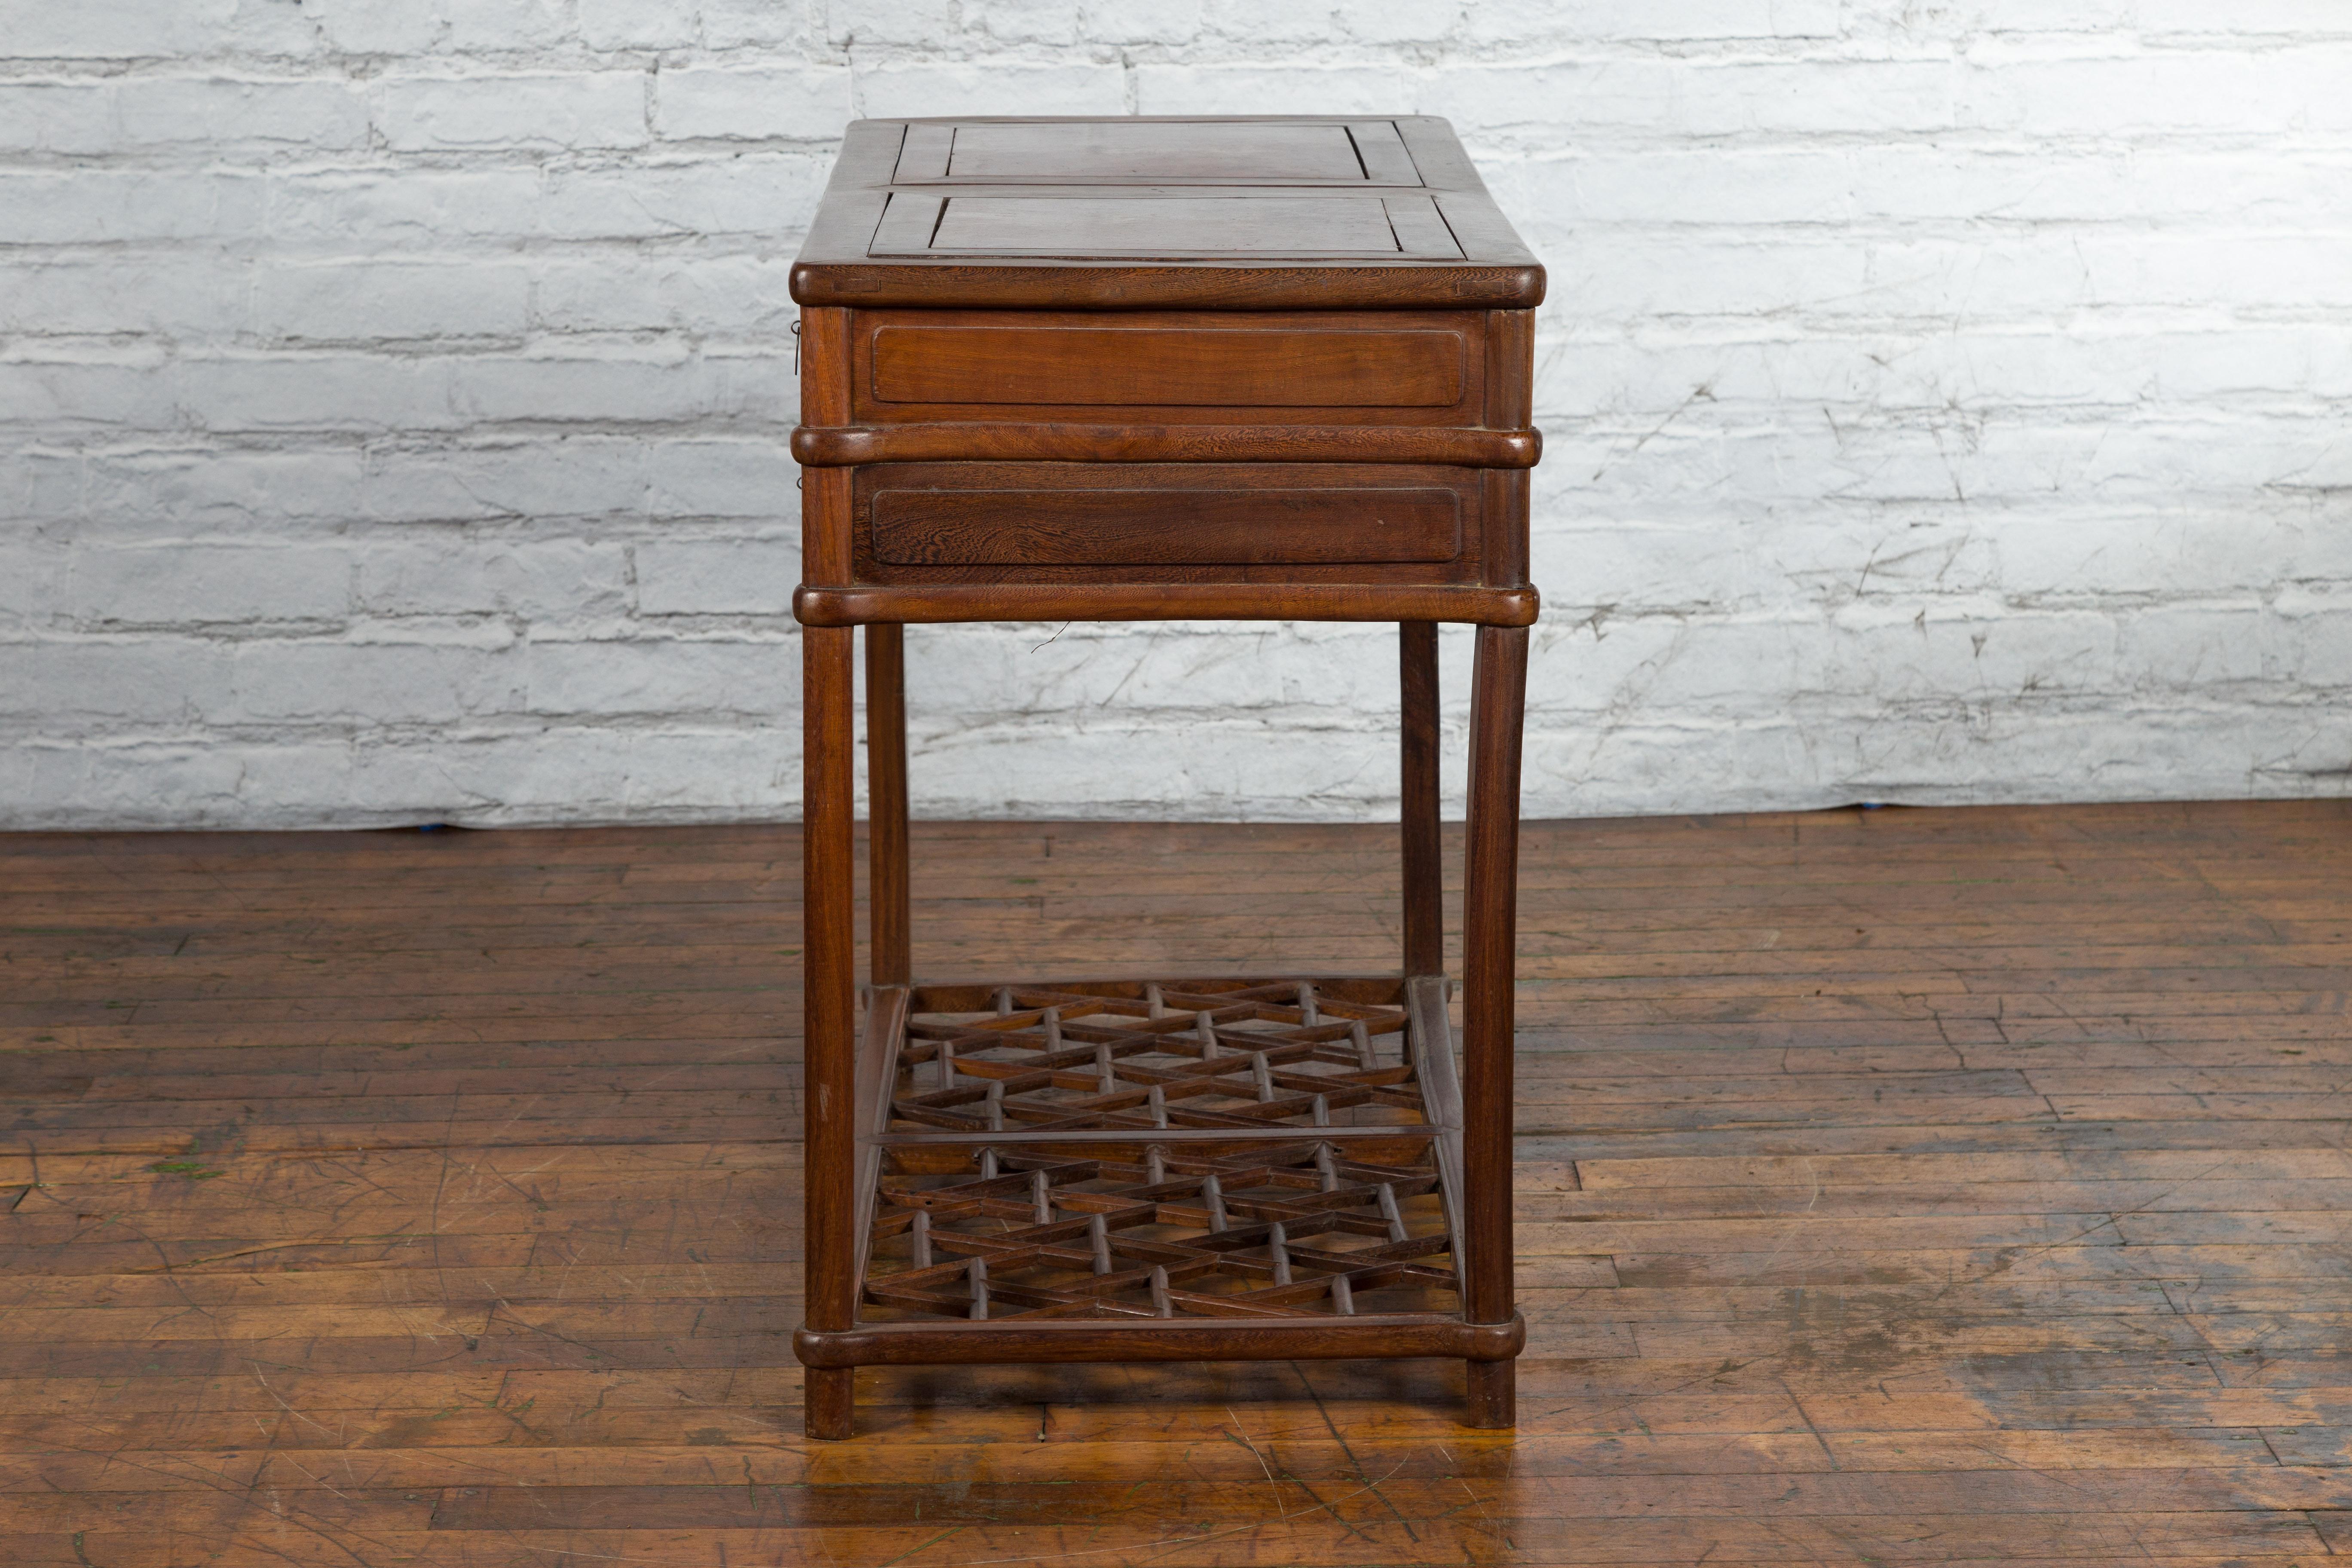 Qing Dynasty 19th Century Desk with Burlwood Top, Drawers and Cracked Ice Shelf For Sale 6